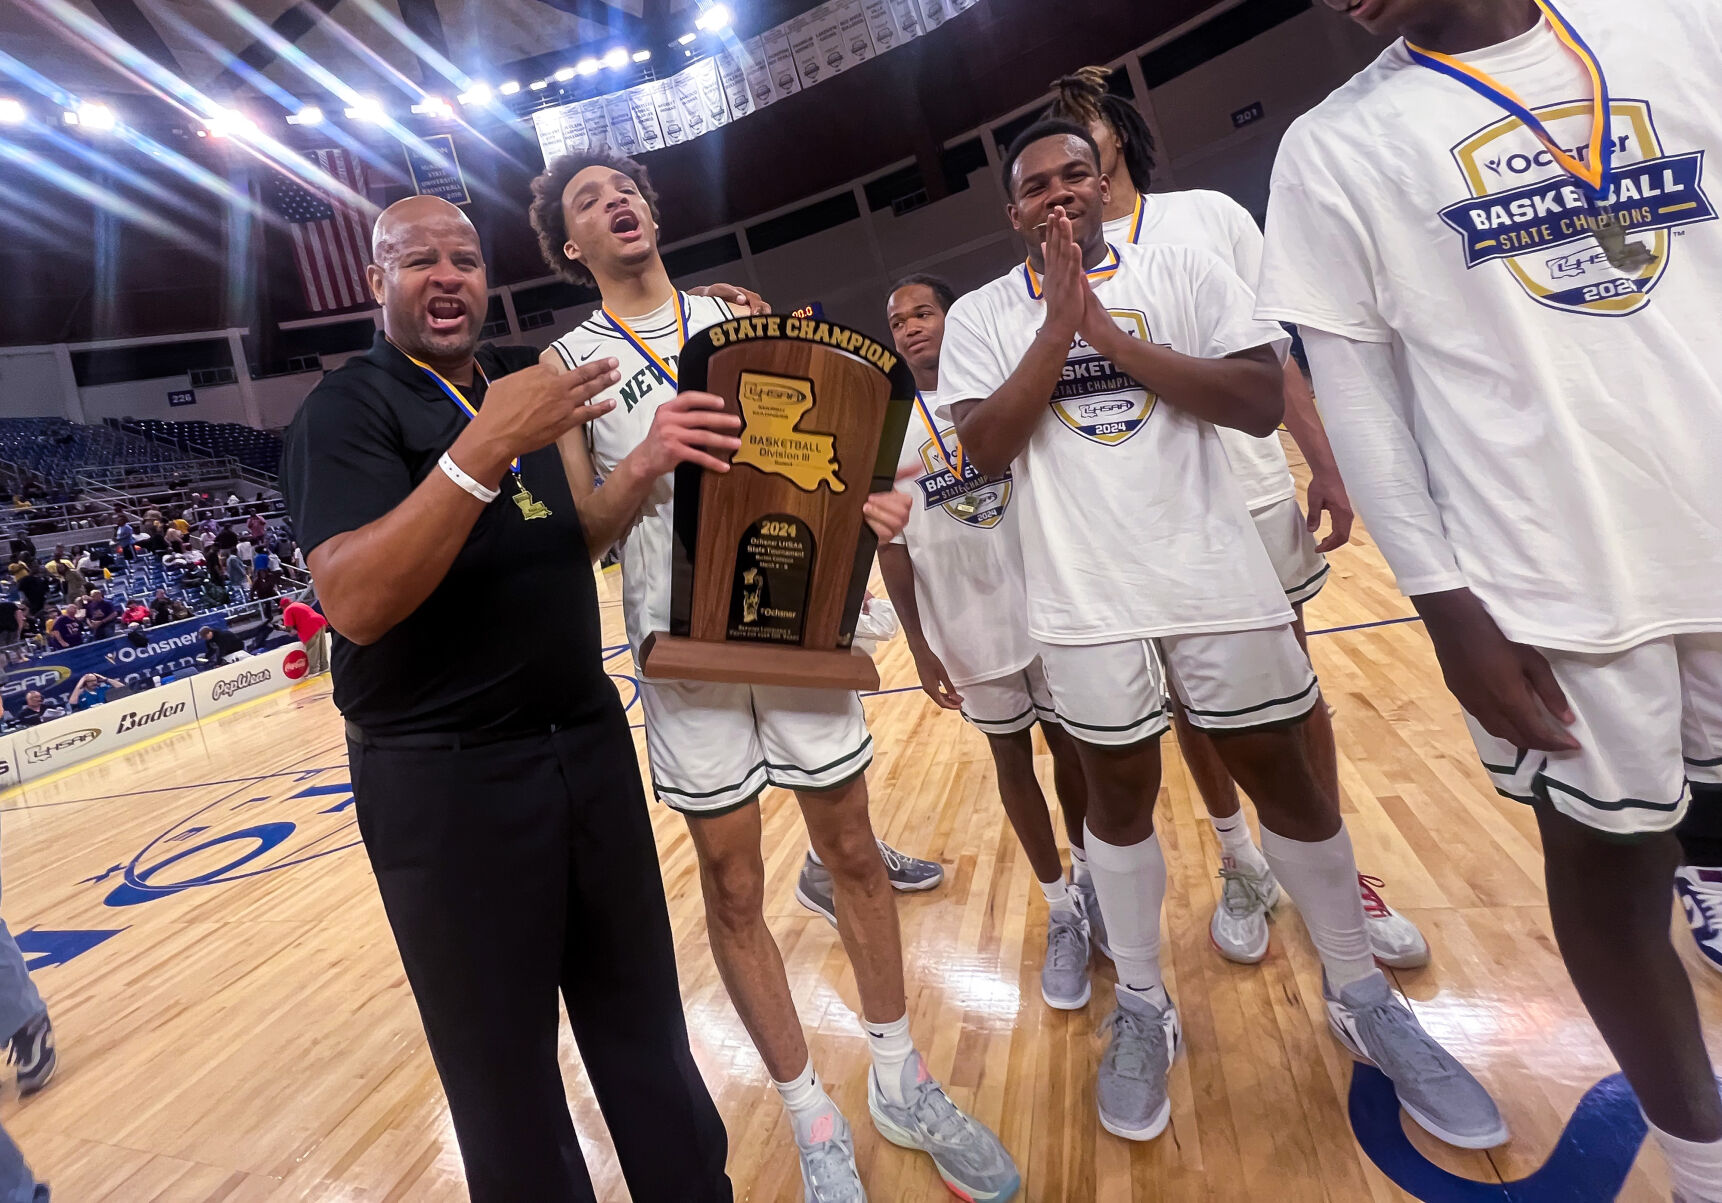 Newman dominates with 18-0 scoring run for third consecutive state basketball title